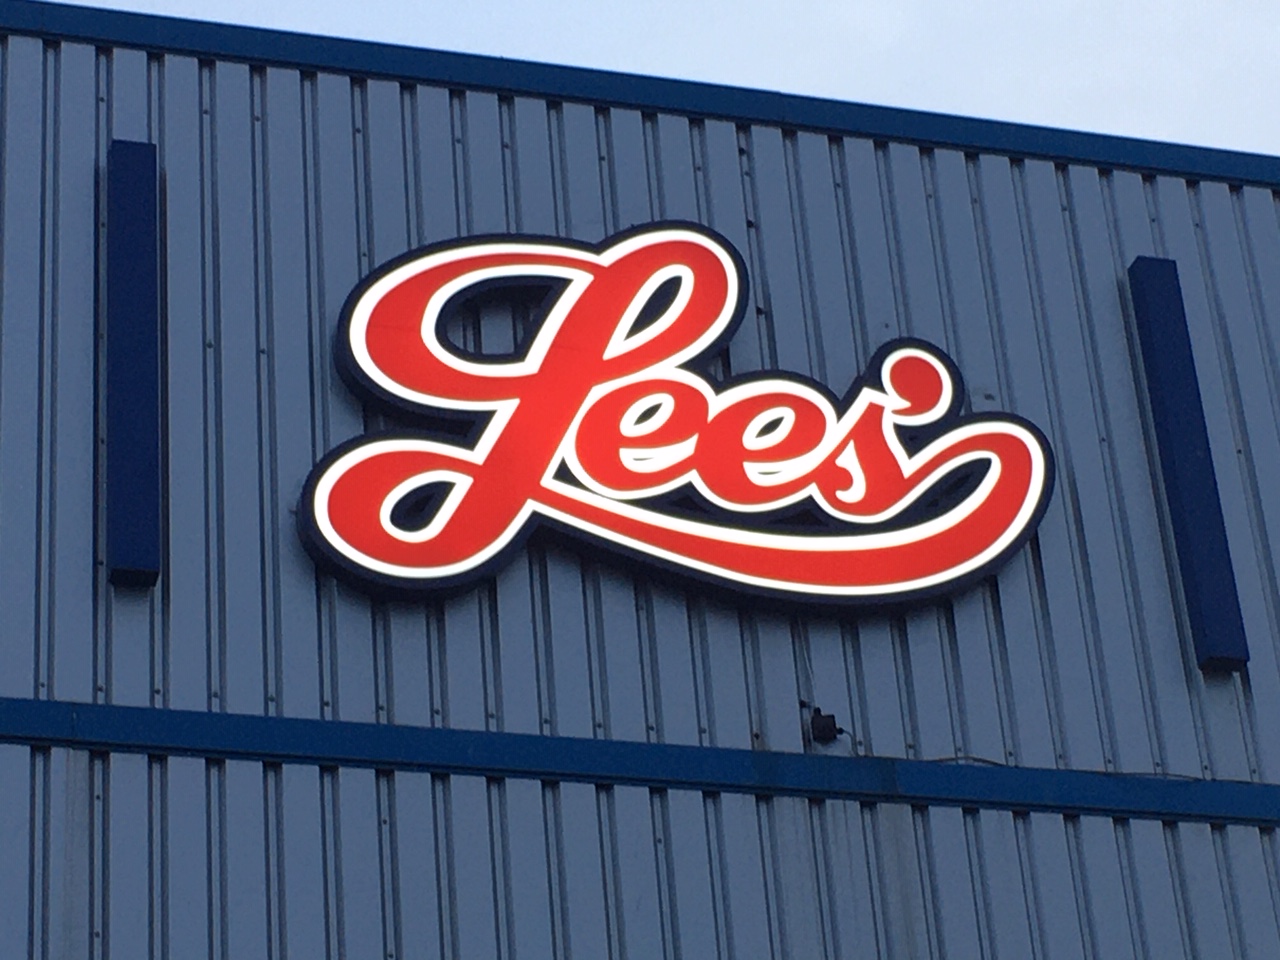 Following the purchase of Lees, the Group will takeover the factory in Coatbridge.